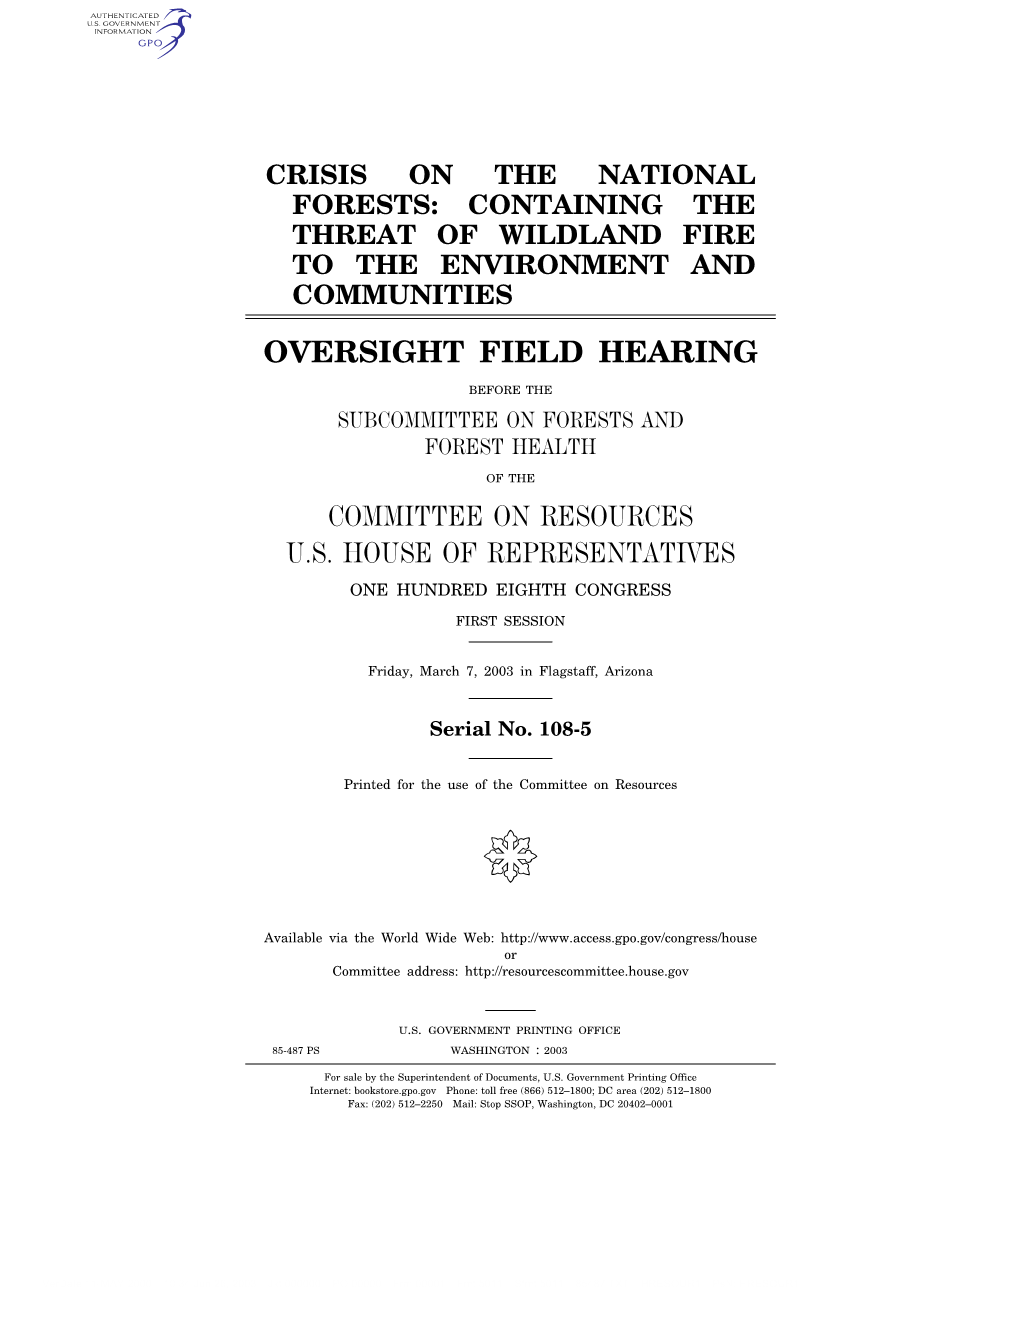 Oversight Field Hearing Committee on Resources U.S